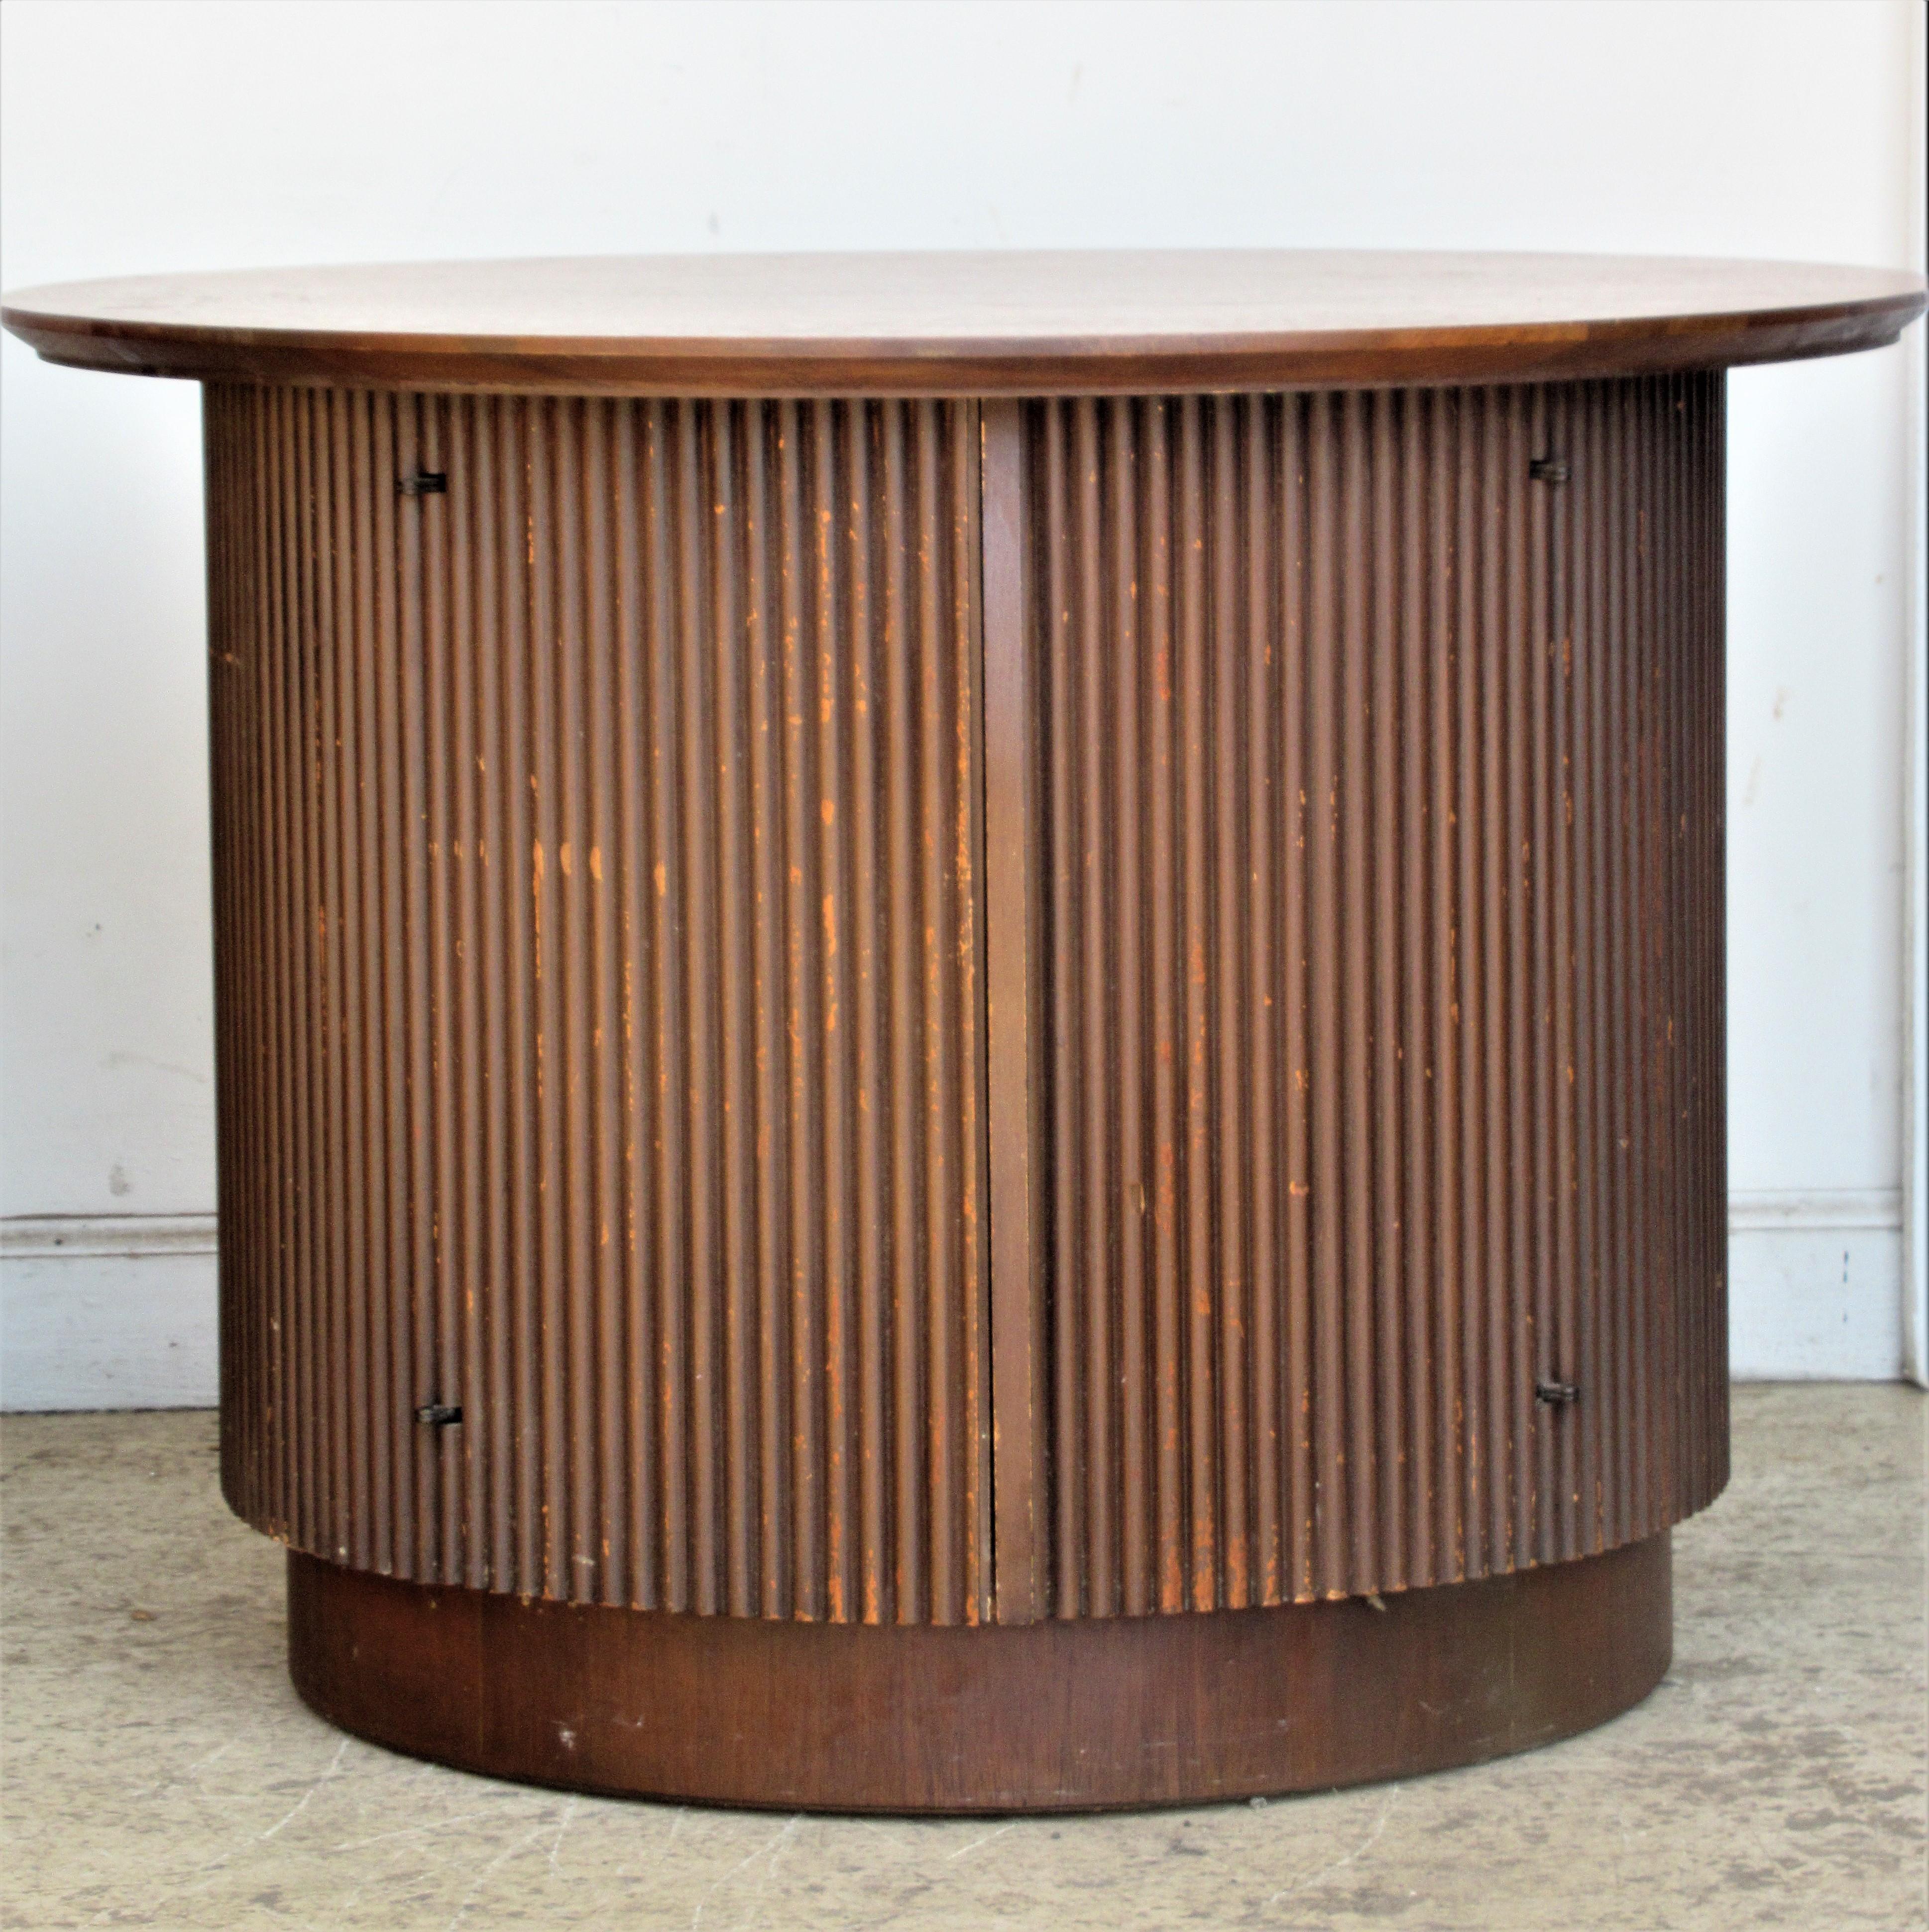 A good looking pair of mid 20th century walnut tambour door drum form side table cabinets by Lane Altavista - circa 1960.